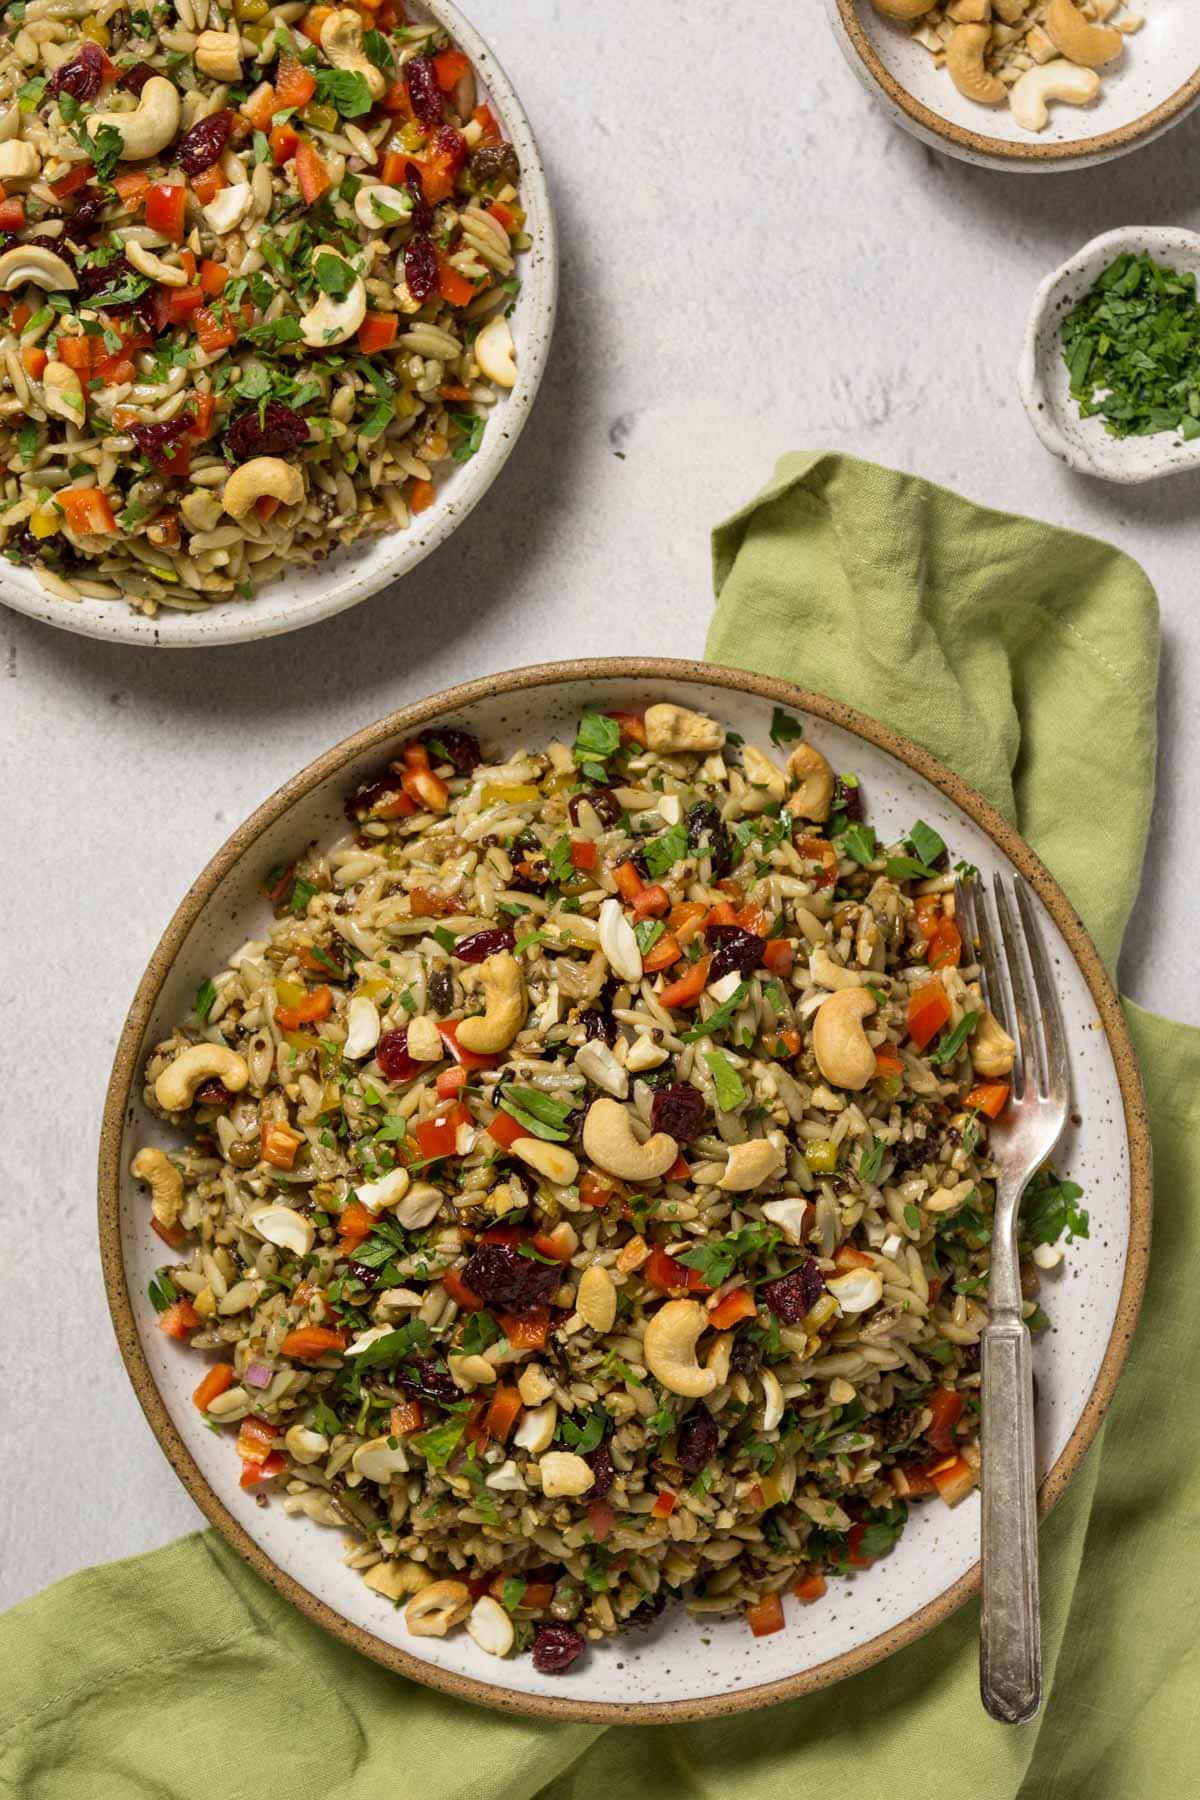 Orzo wild rice salad in a pottery bowl with a green napkin